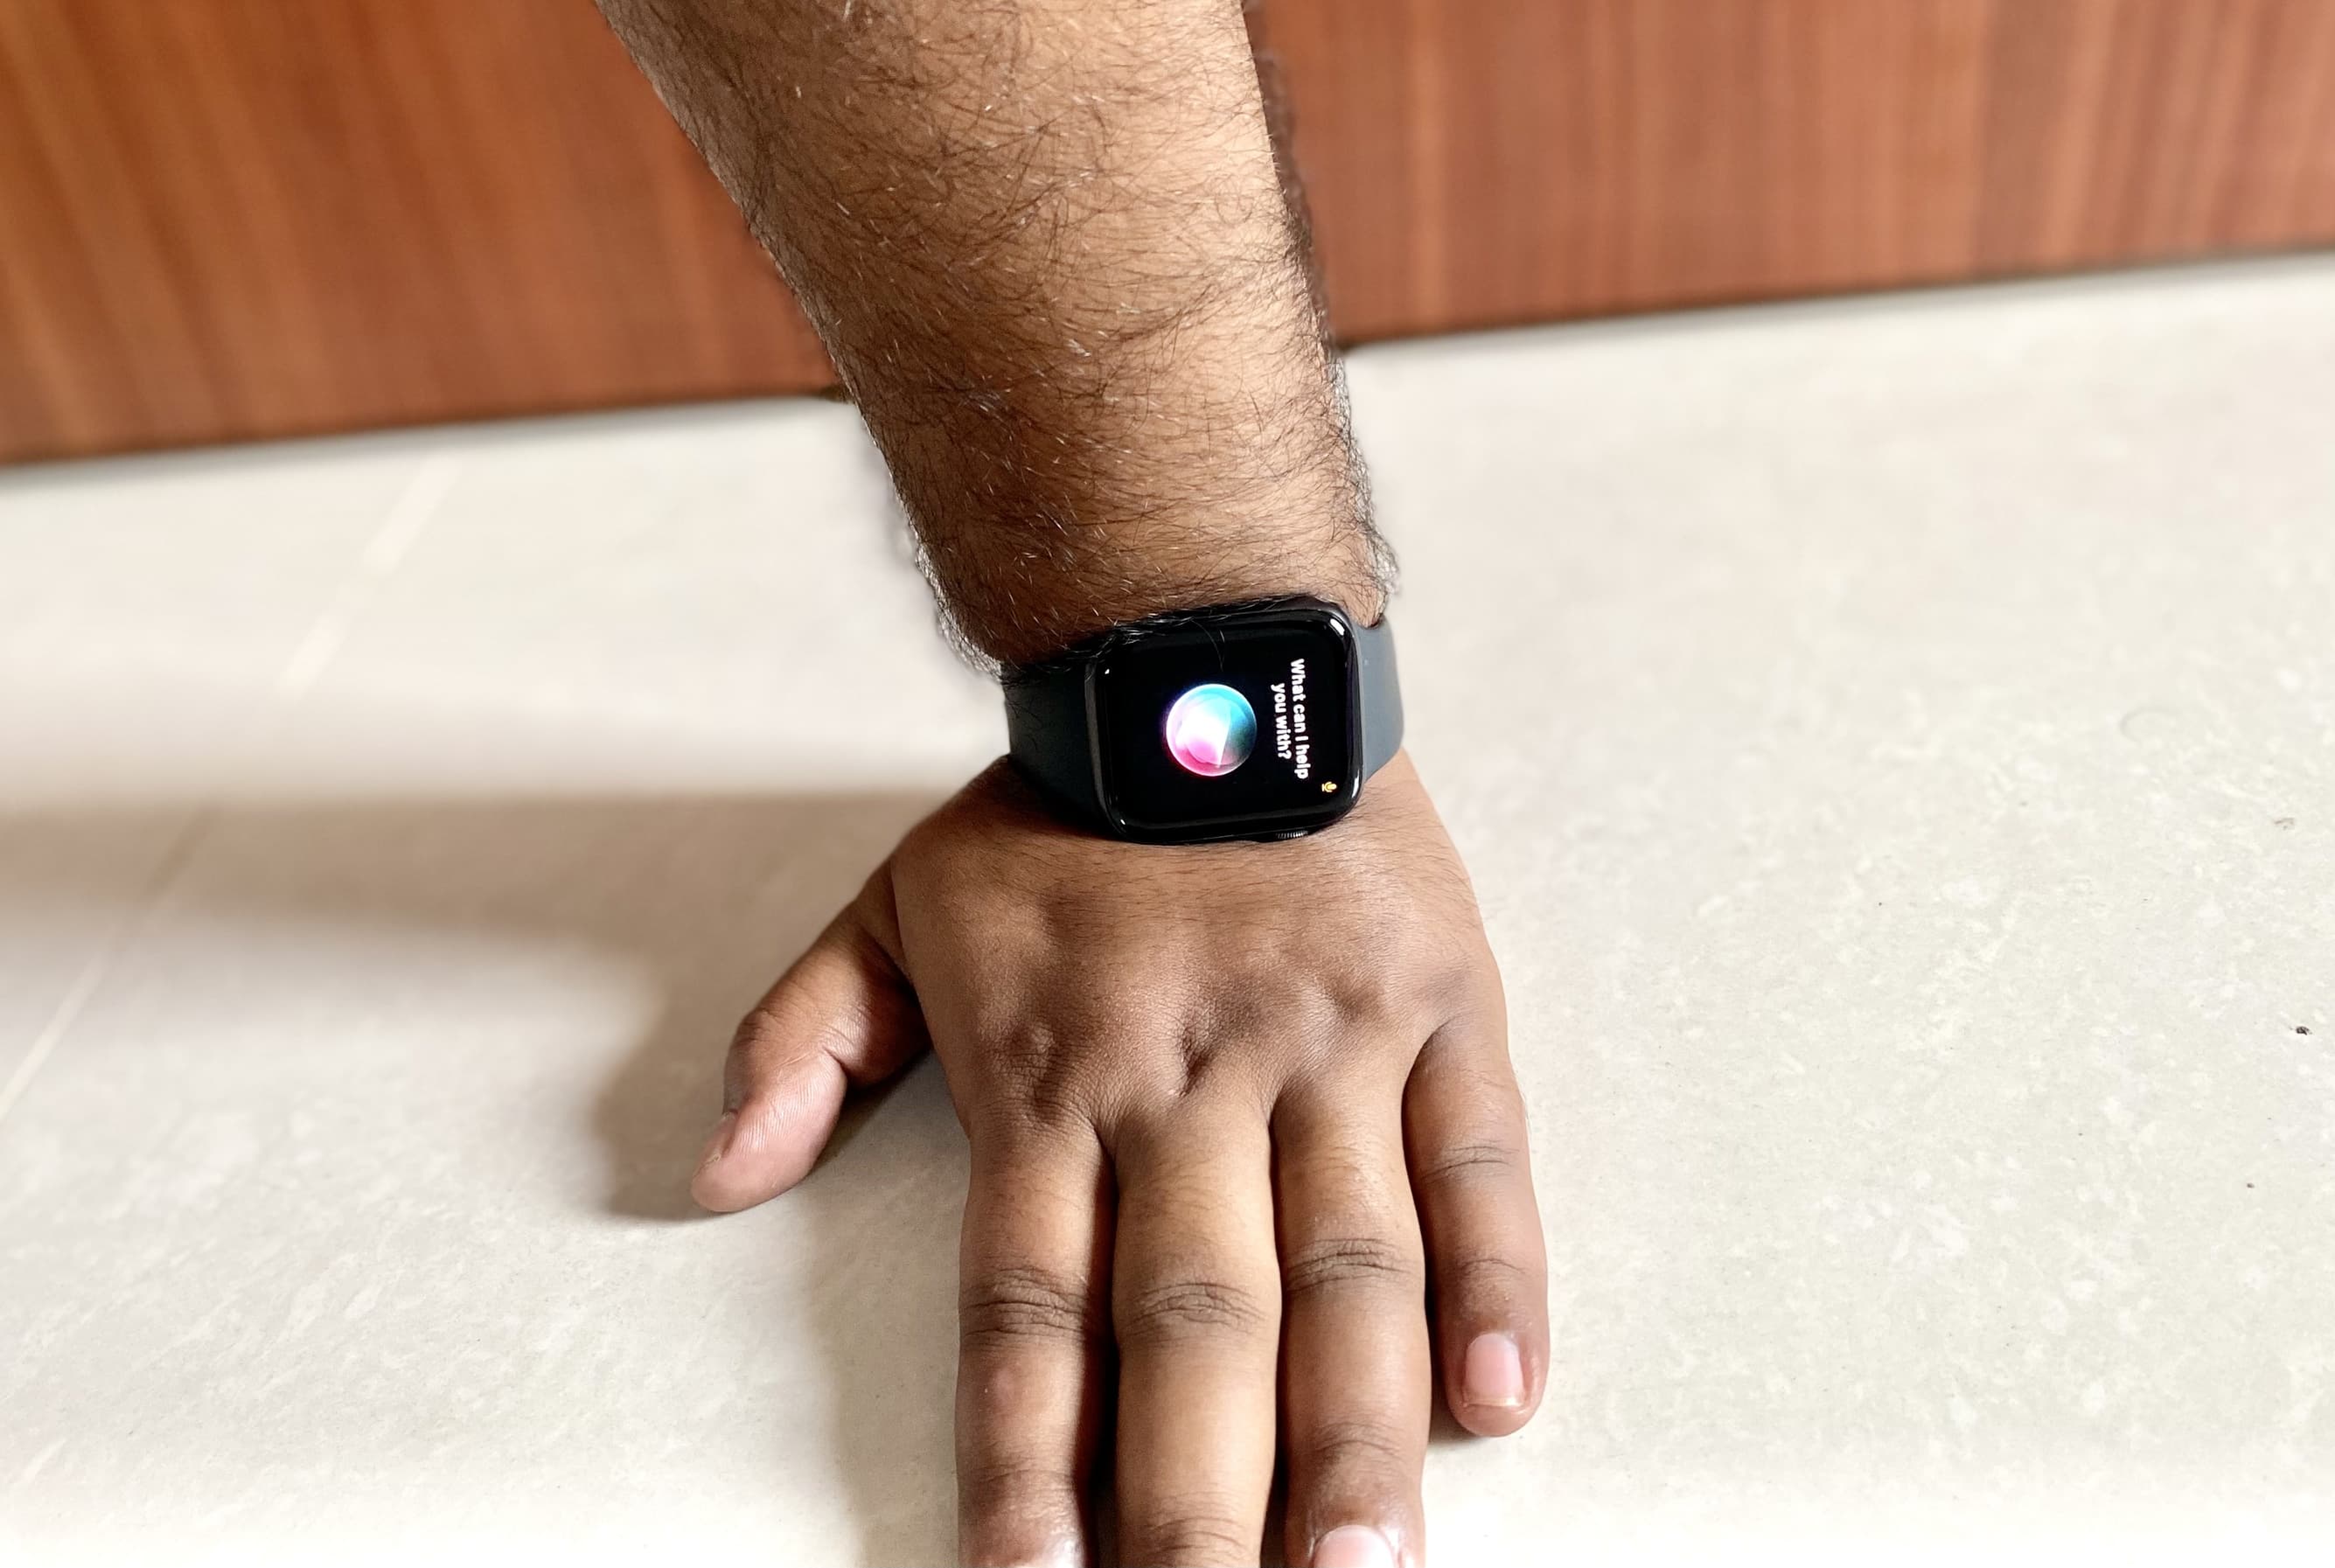 Siri unnecessarily activating on Apple Watch during workout